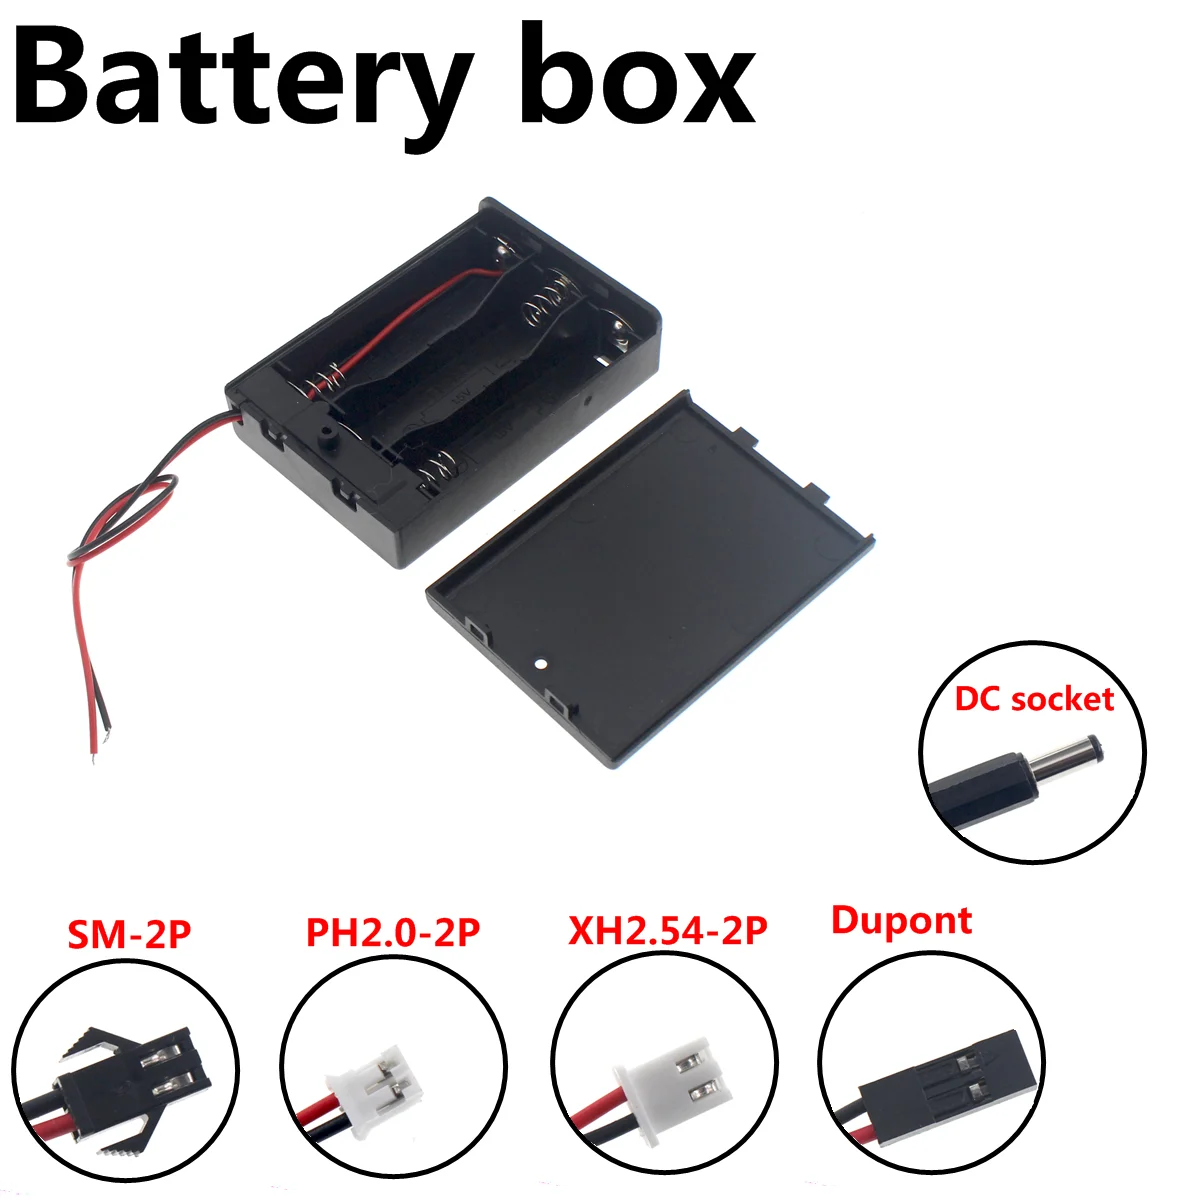 5PCS DIY 3x AA with switch closed Battery Holder Storage Box Case with DC 5.5x2.1mm XH2.54 PH2.0 SM-2P Power Plug 5pcs 3d printer part dual z axis upgrade kit belt s2m closed loop rubber640mm 782mmlength width 6mm for cr 10 ender 3 ender 3pro